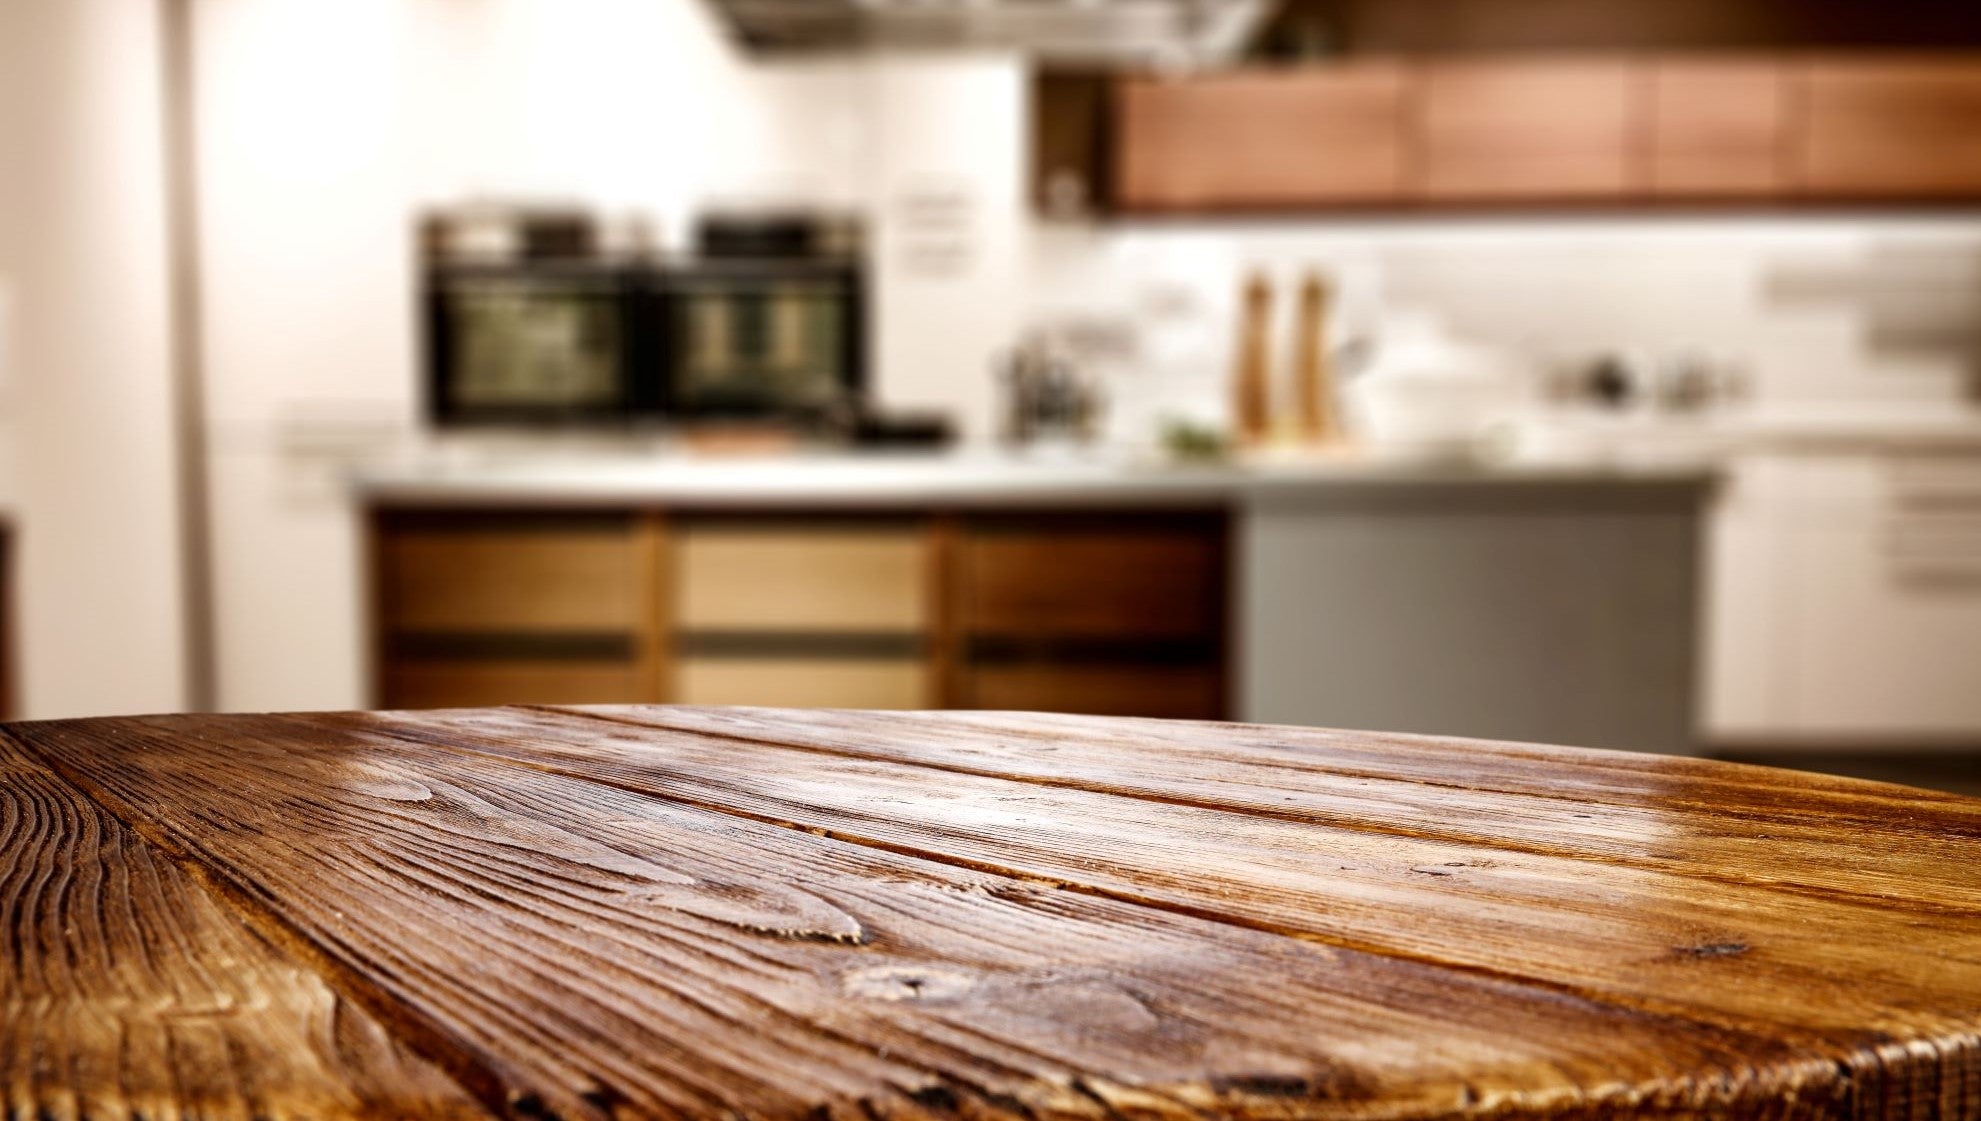 Wood table in a kitchen.